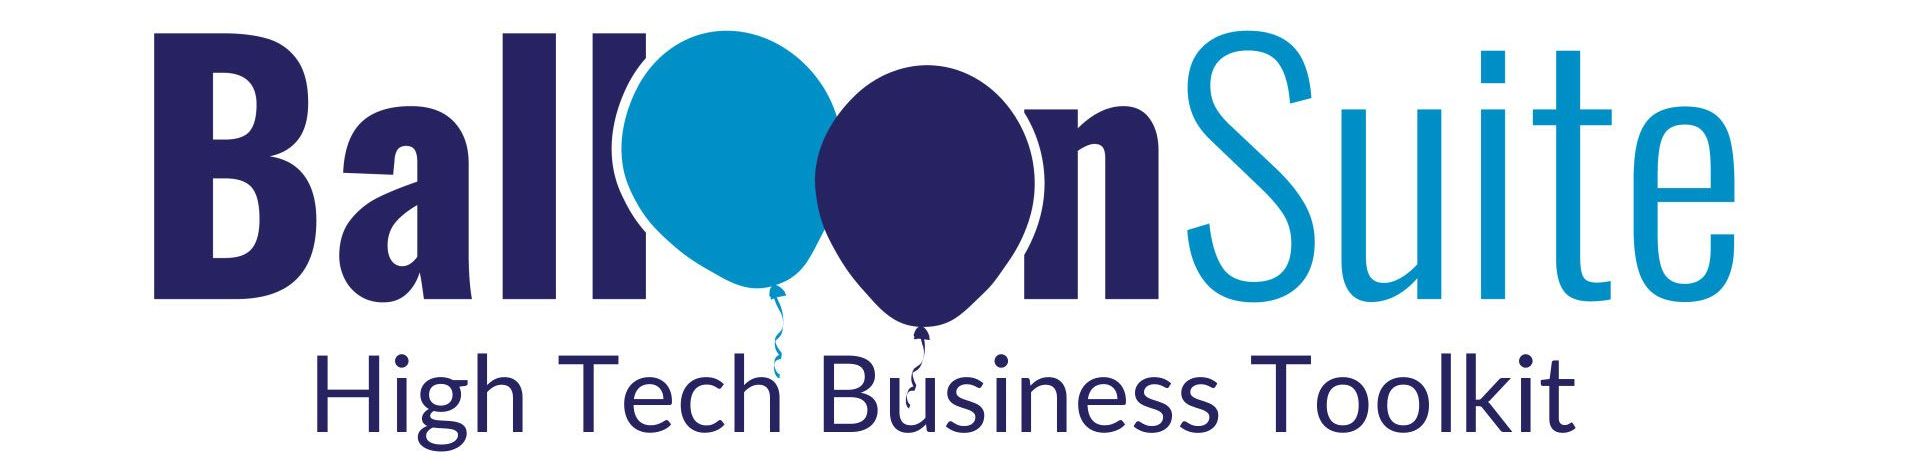 The logo for balloon suite is a high tech business toolkit.